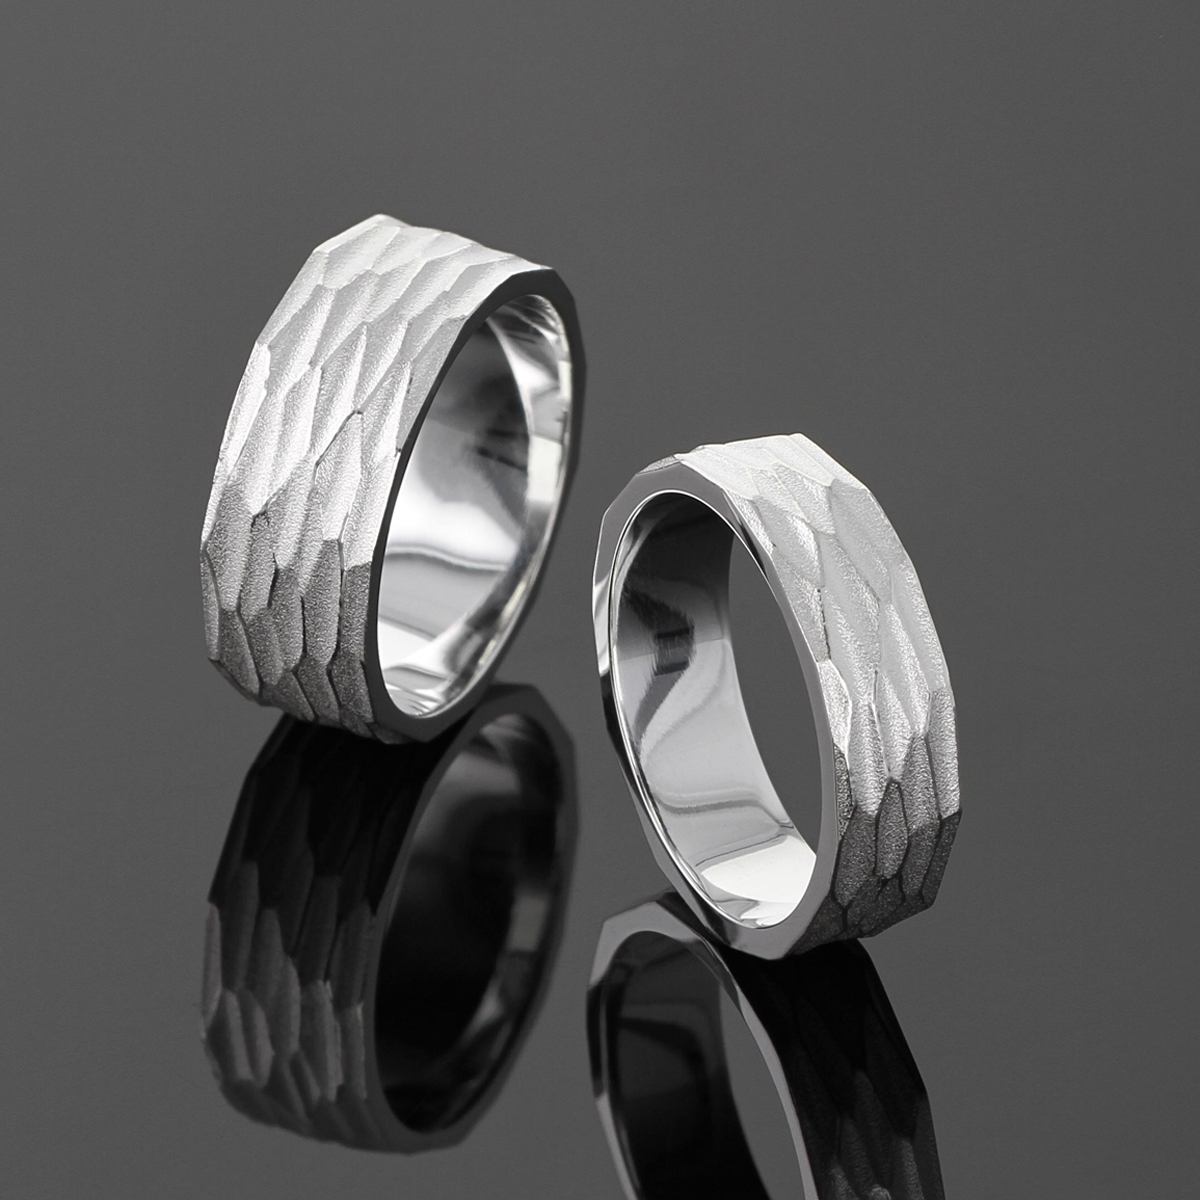 Rings for couples